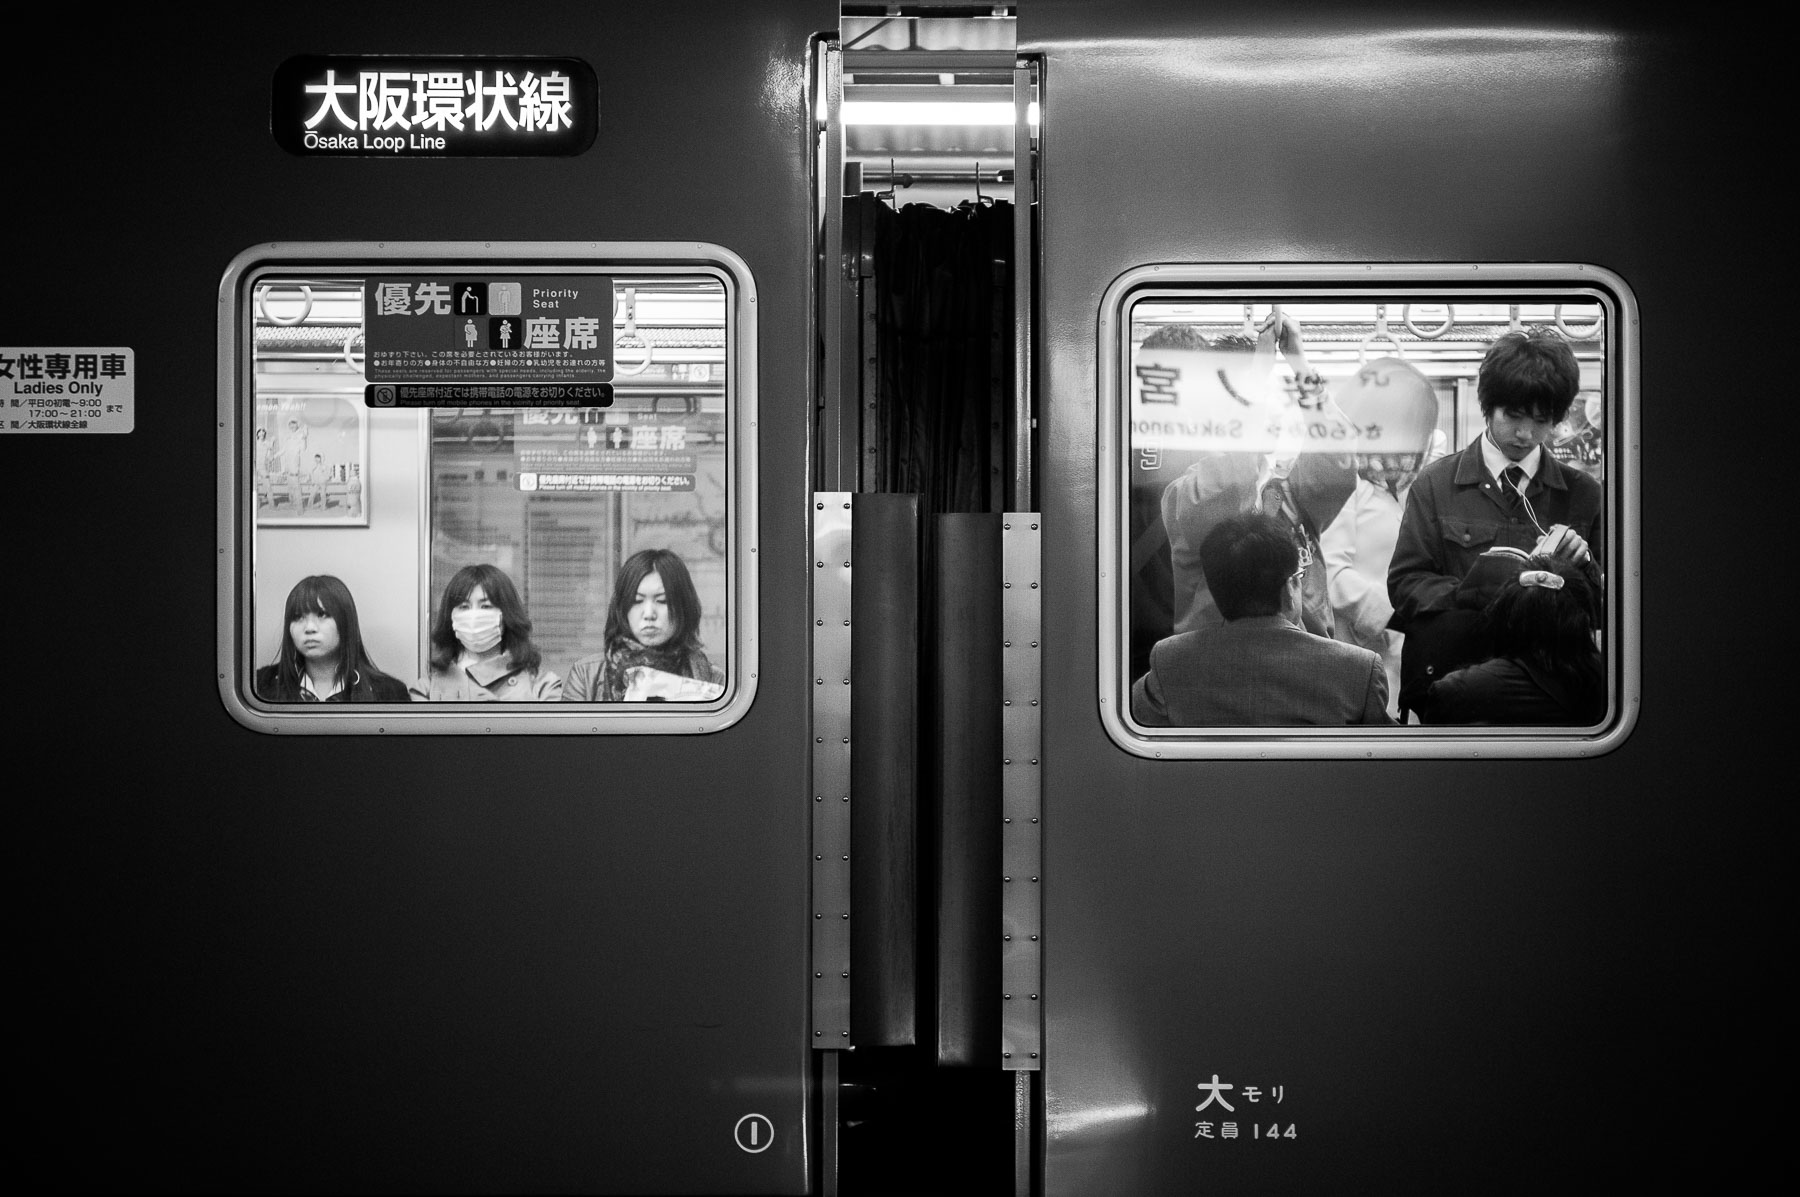 Black and white street photography of the Osaka subway, featuring two squared windows and people standing, showcasing the urban atmosphere of Japan